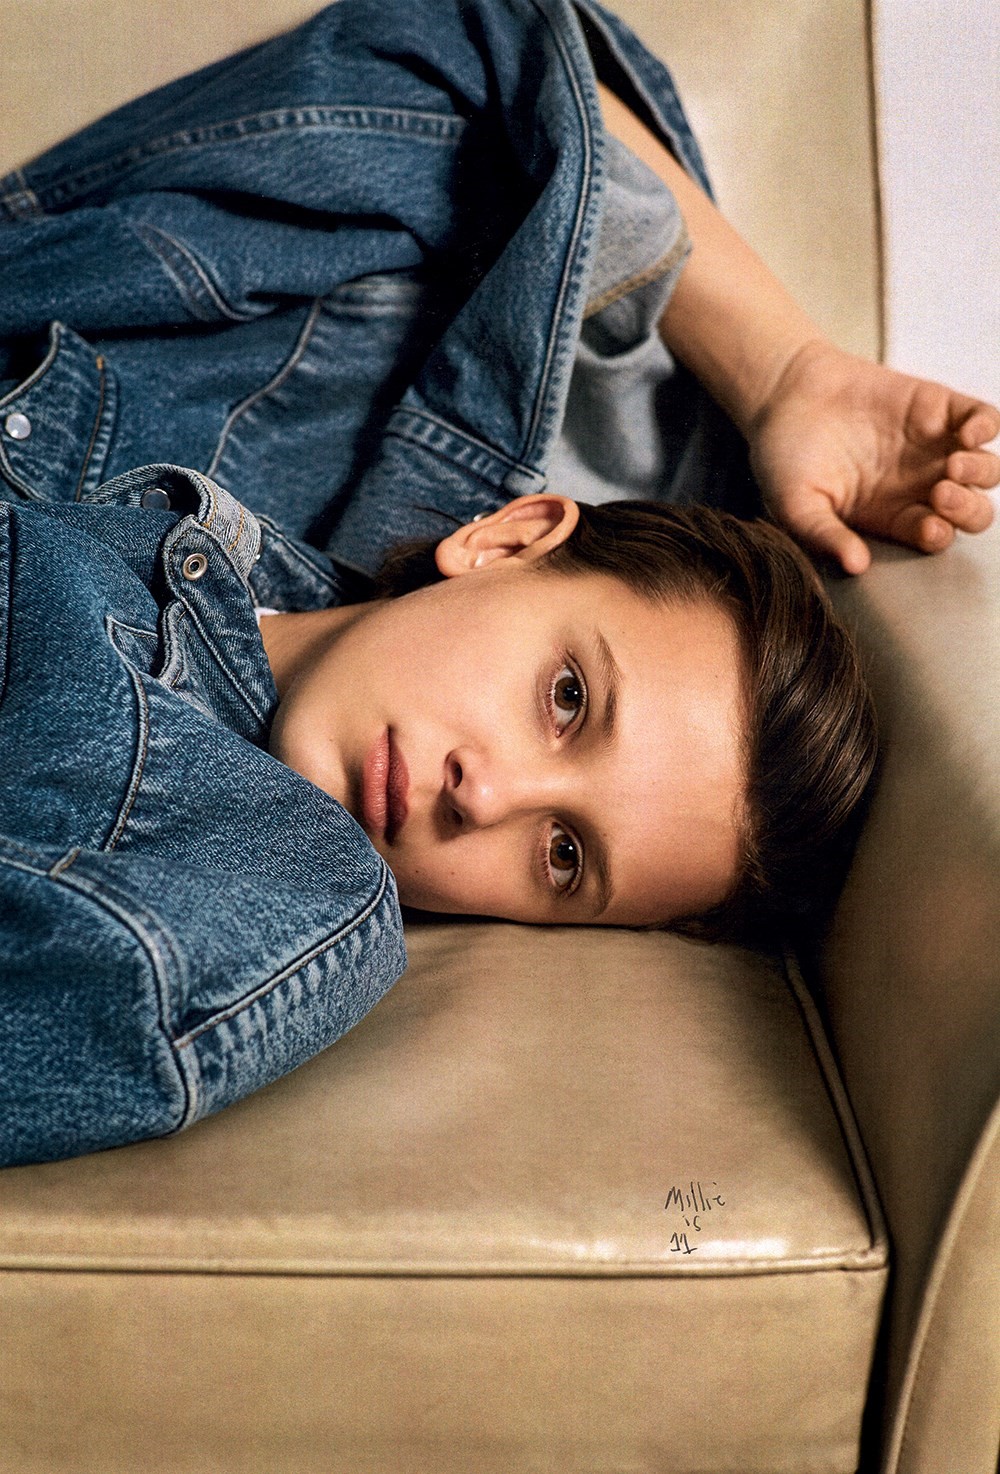 Millie Bobby Brown is officially a model now